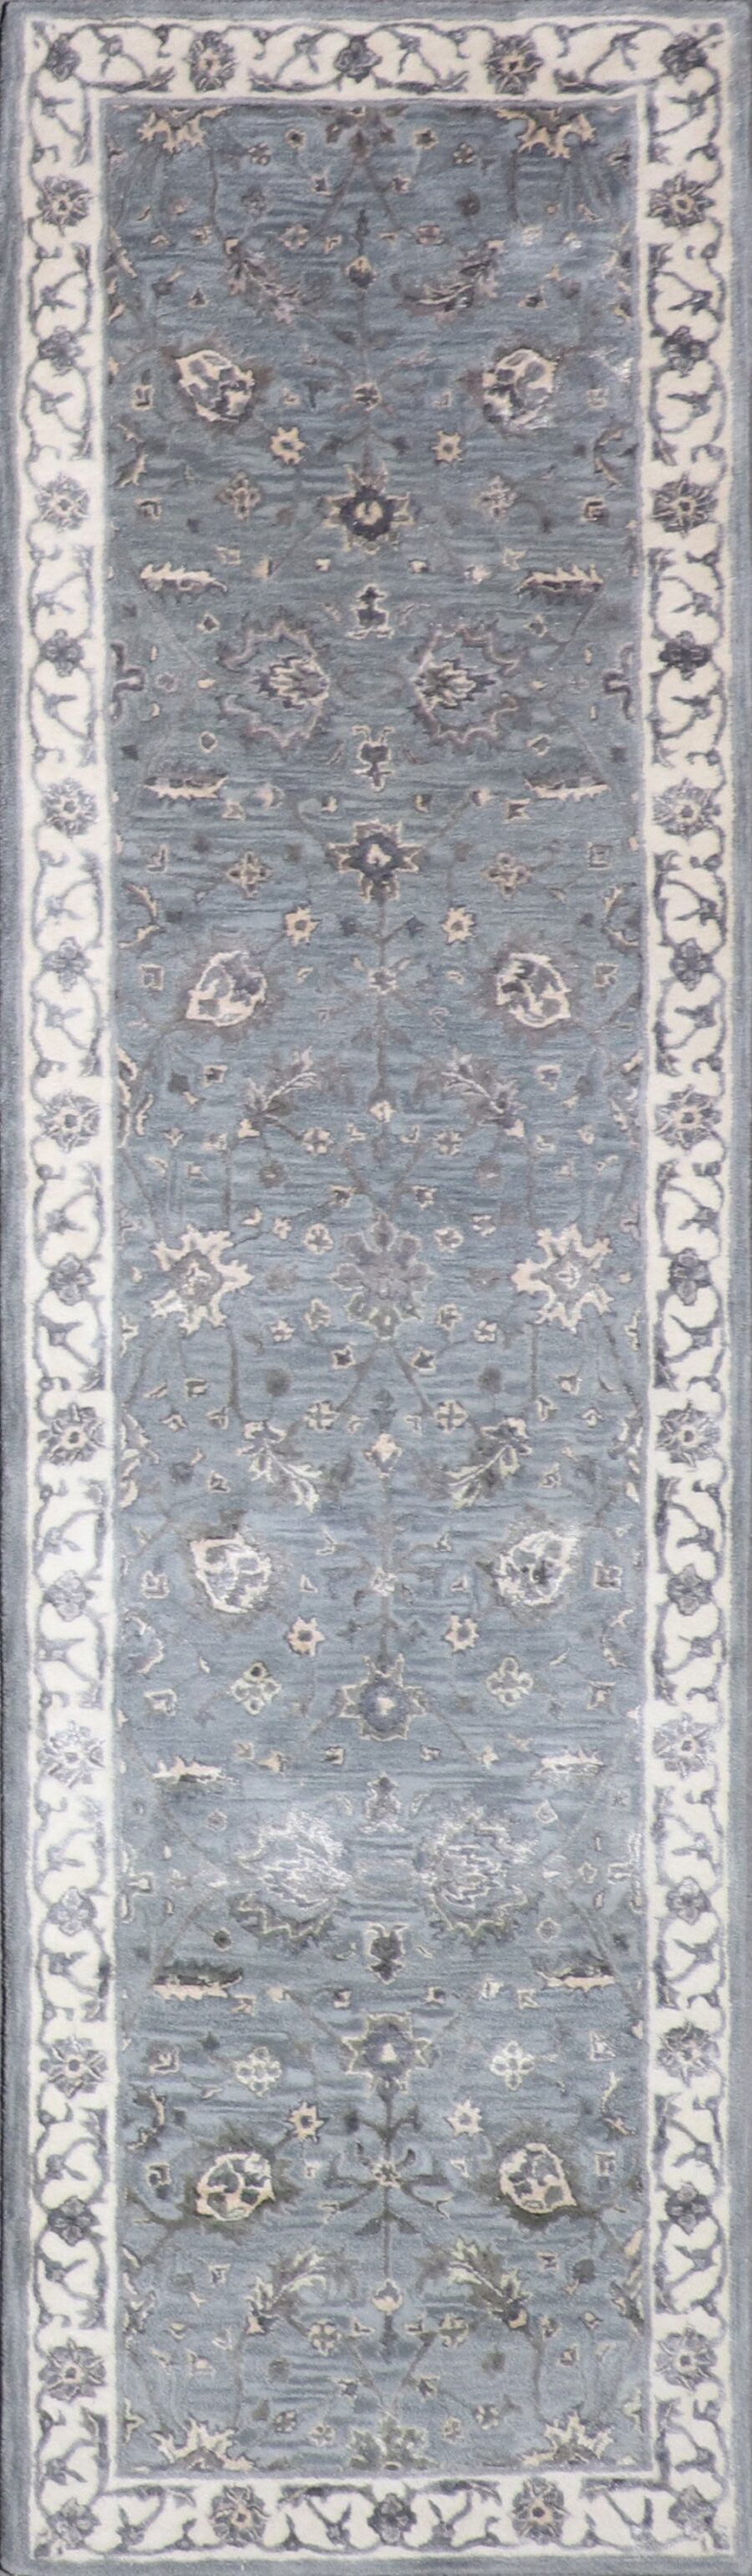 2'11"x10' Decorative Vintage Wool & Silk Hand-Tufted Rug - Direct Rug Import | Rugs in Chicago, Indiana,South Bend,Granger